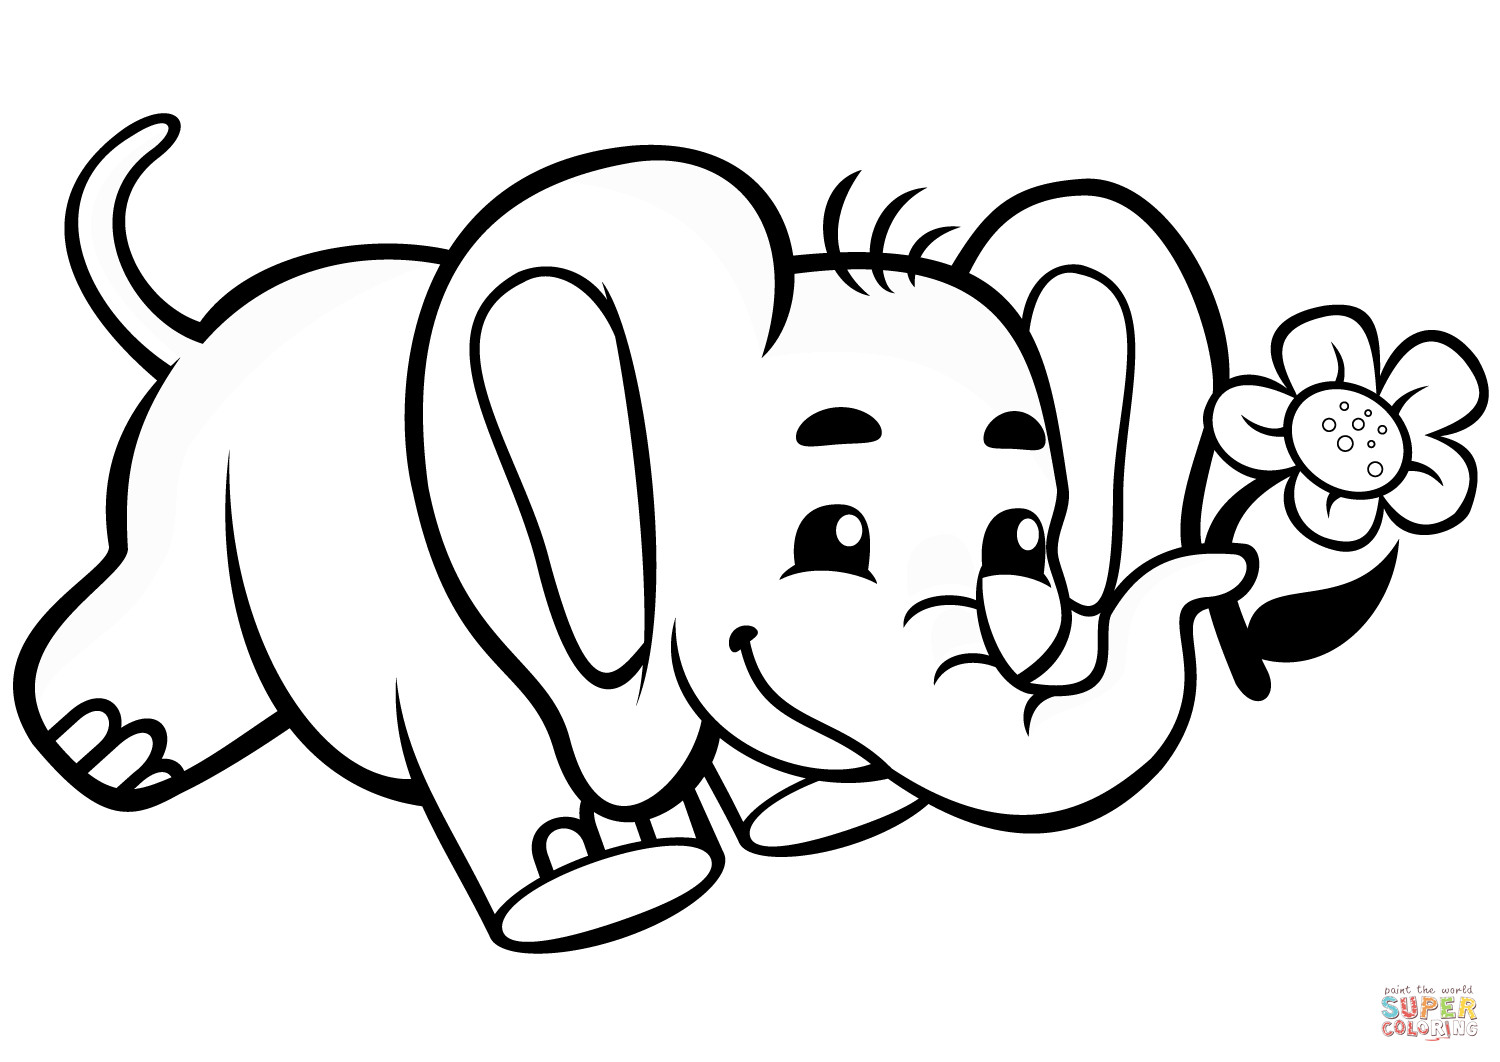 Baby Elephant Coloring Page
 Cute Baby Elephant with Flower coloring page